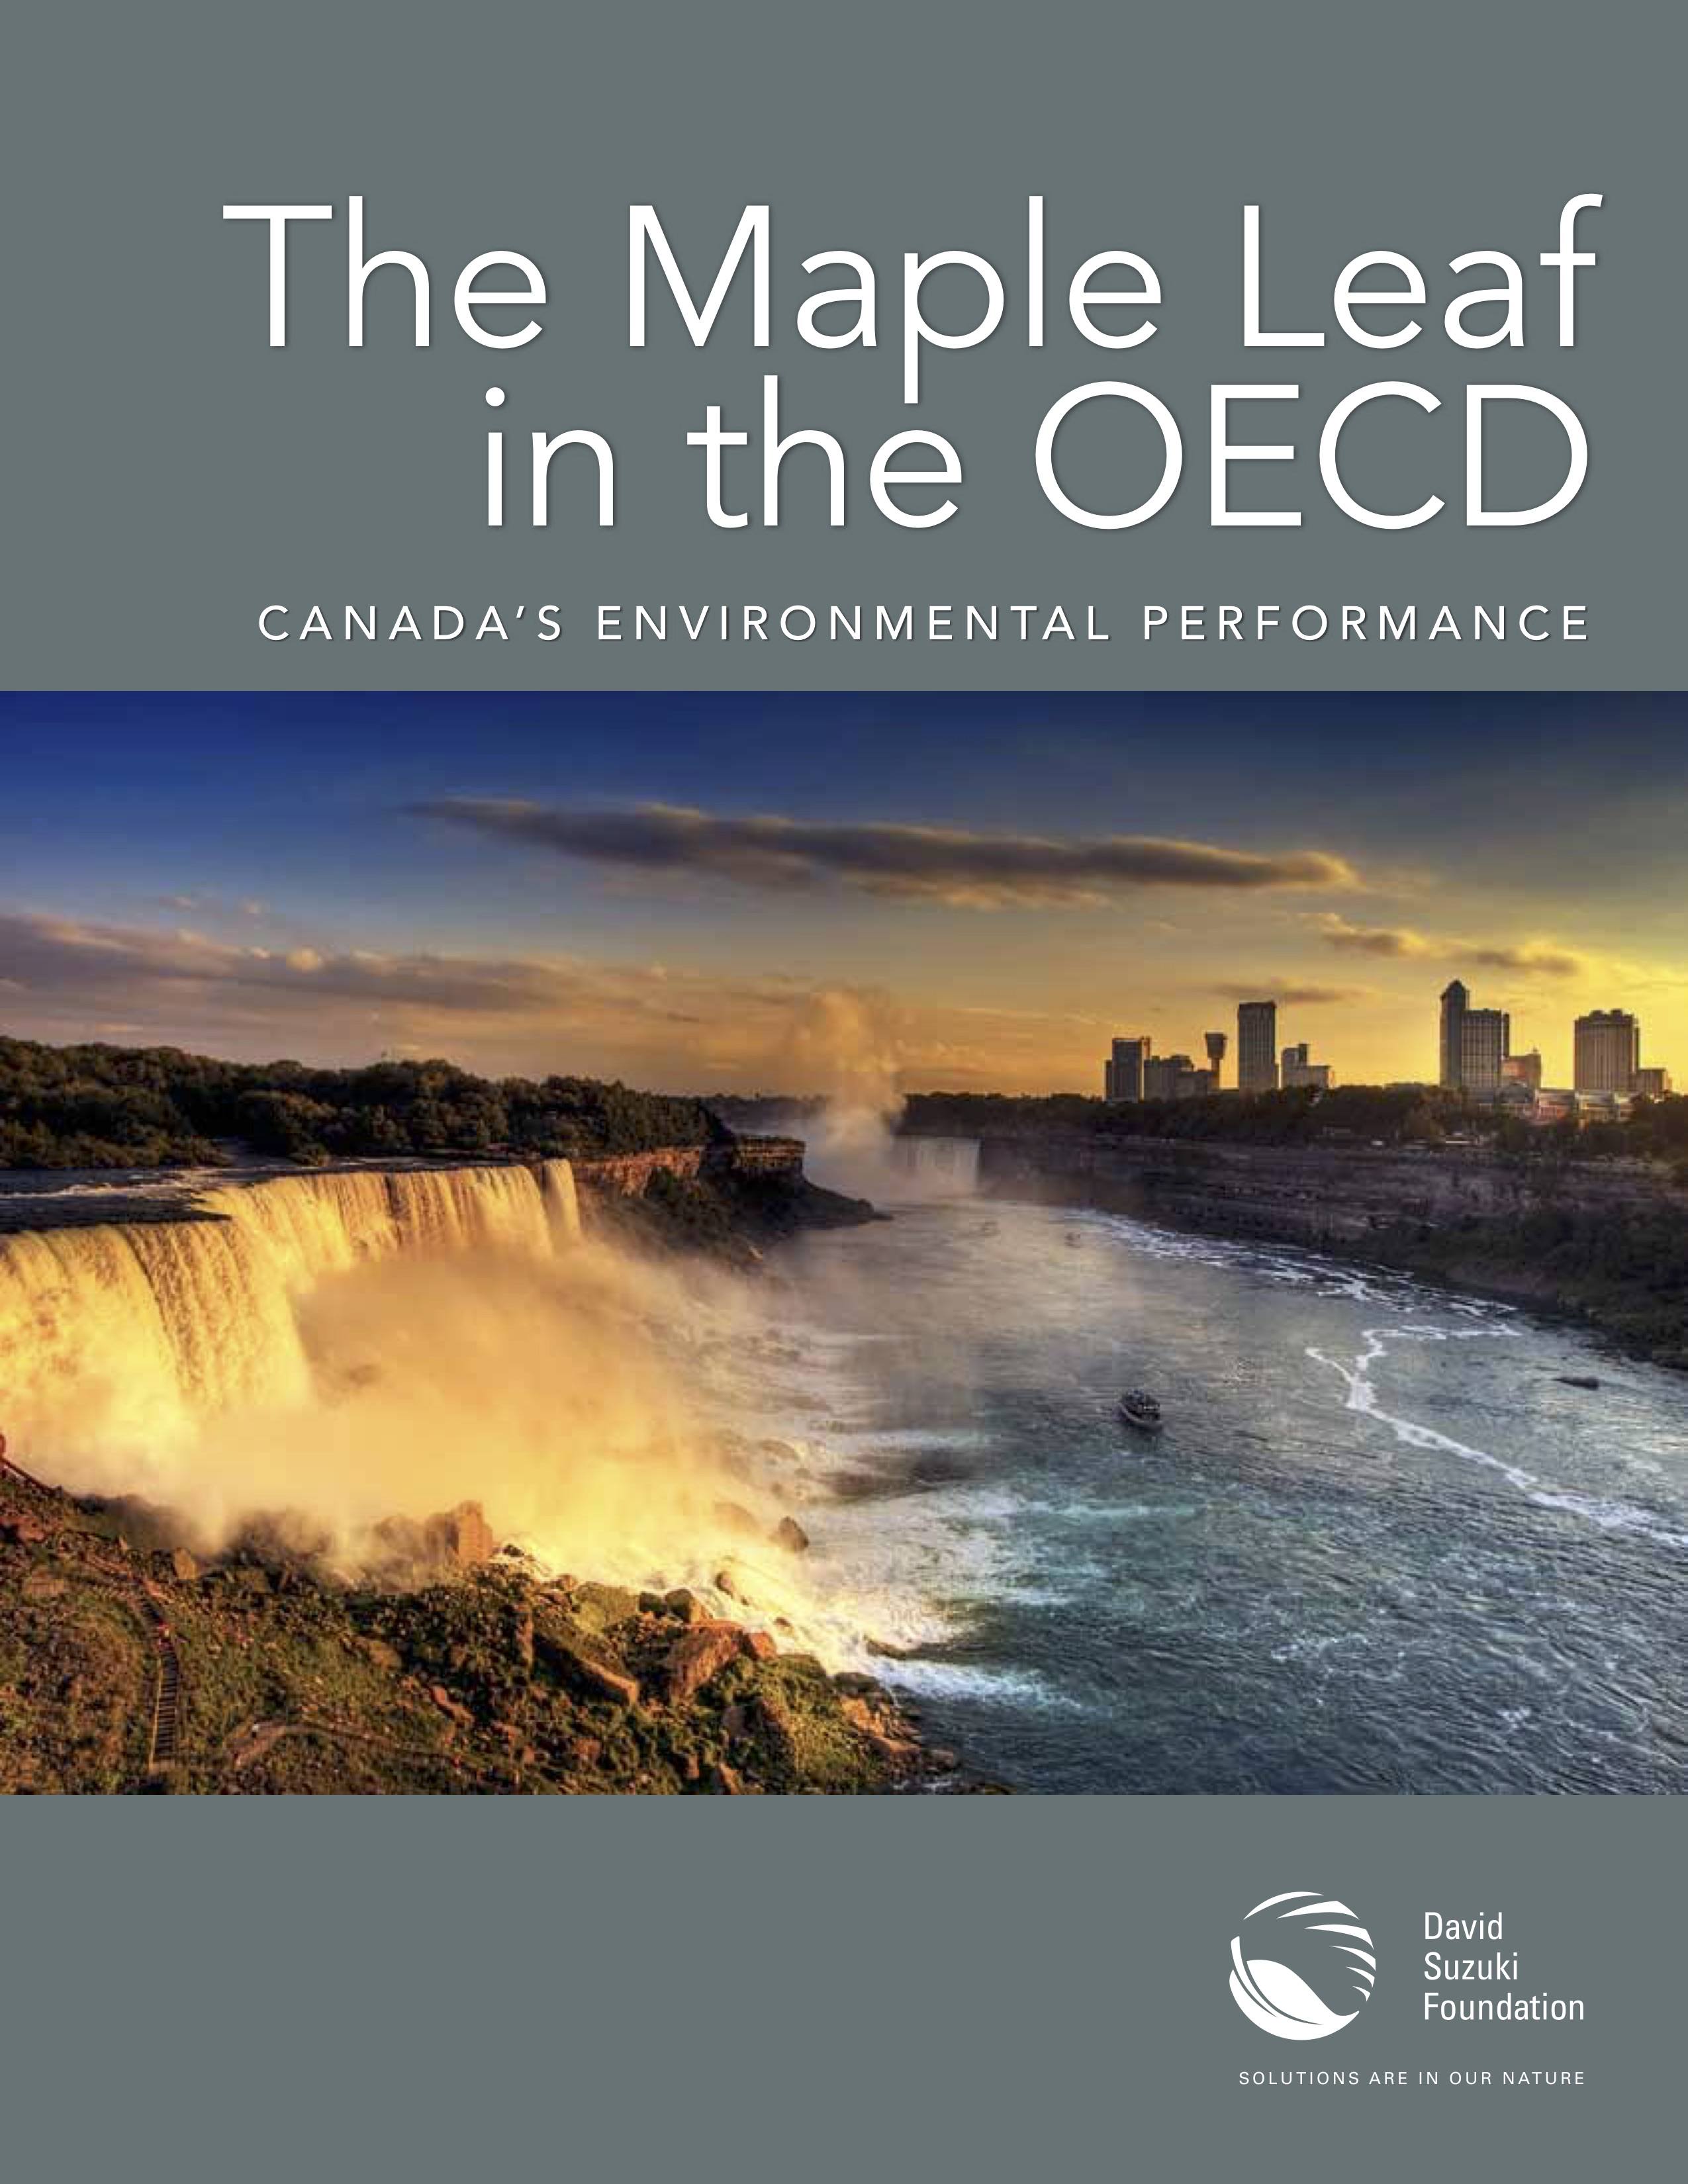 The Maple Leaf in the OECD: Canada's Environmental Performance